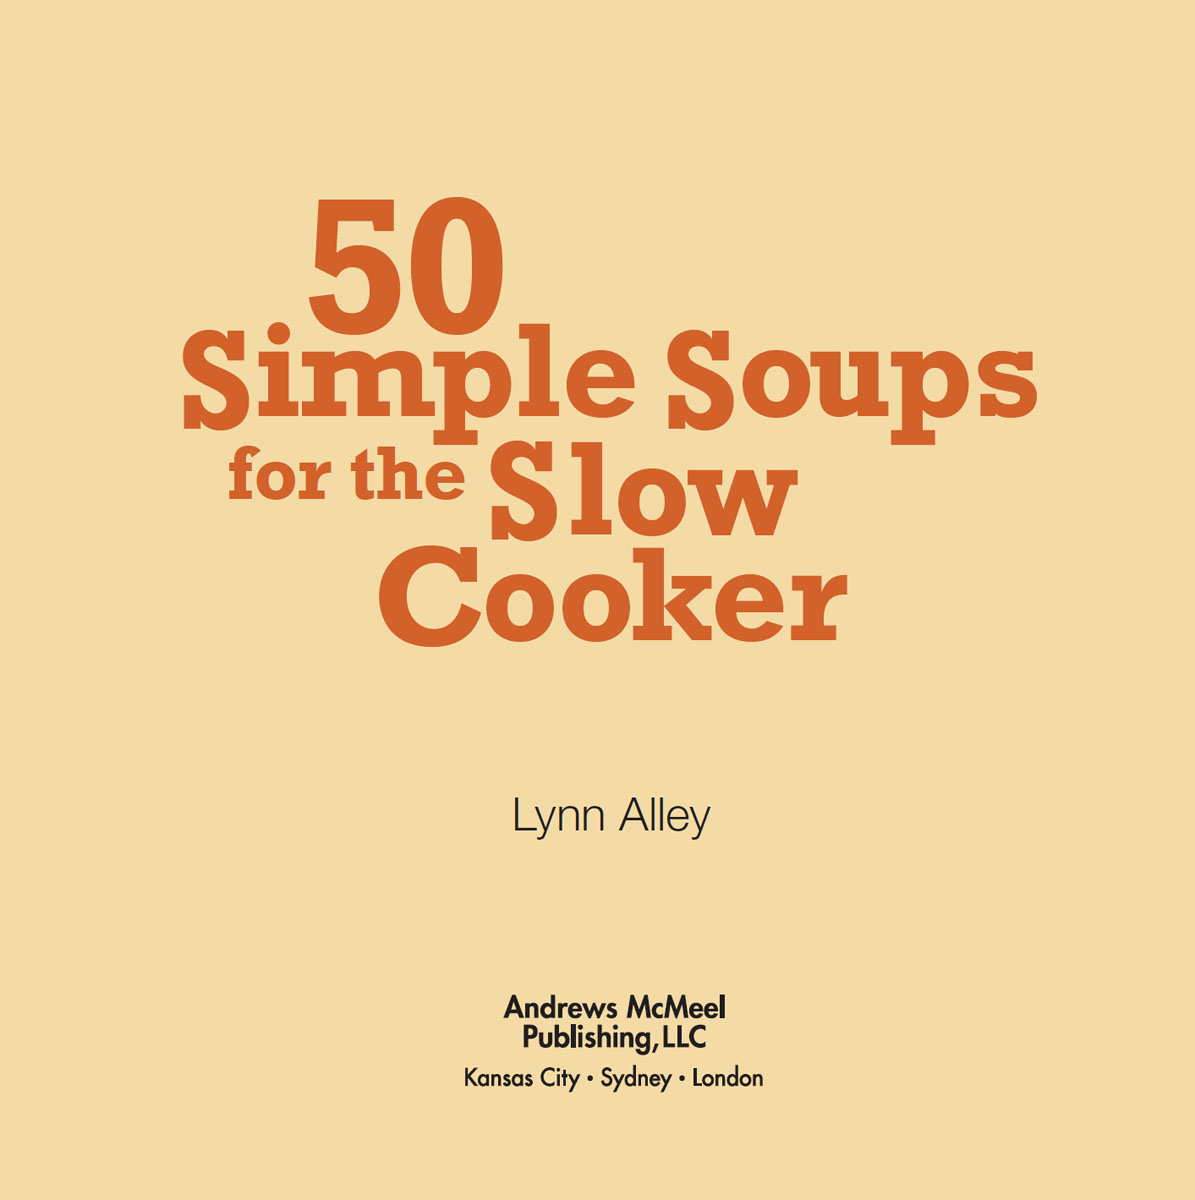 50 Simple Soups for the Slow Cooker copyright 2011 by Lynn Alley Photographs - photo 3